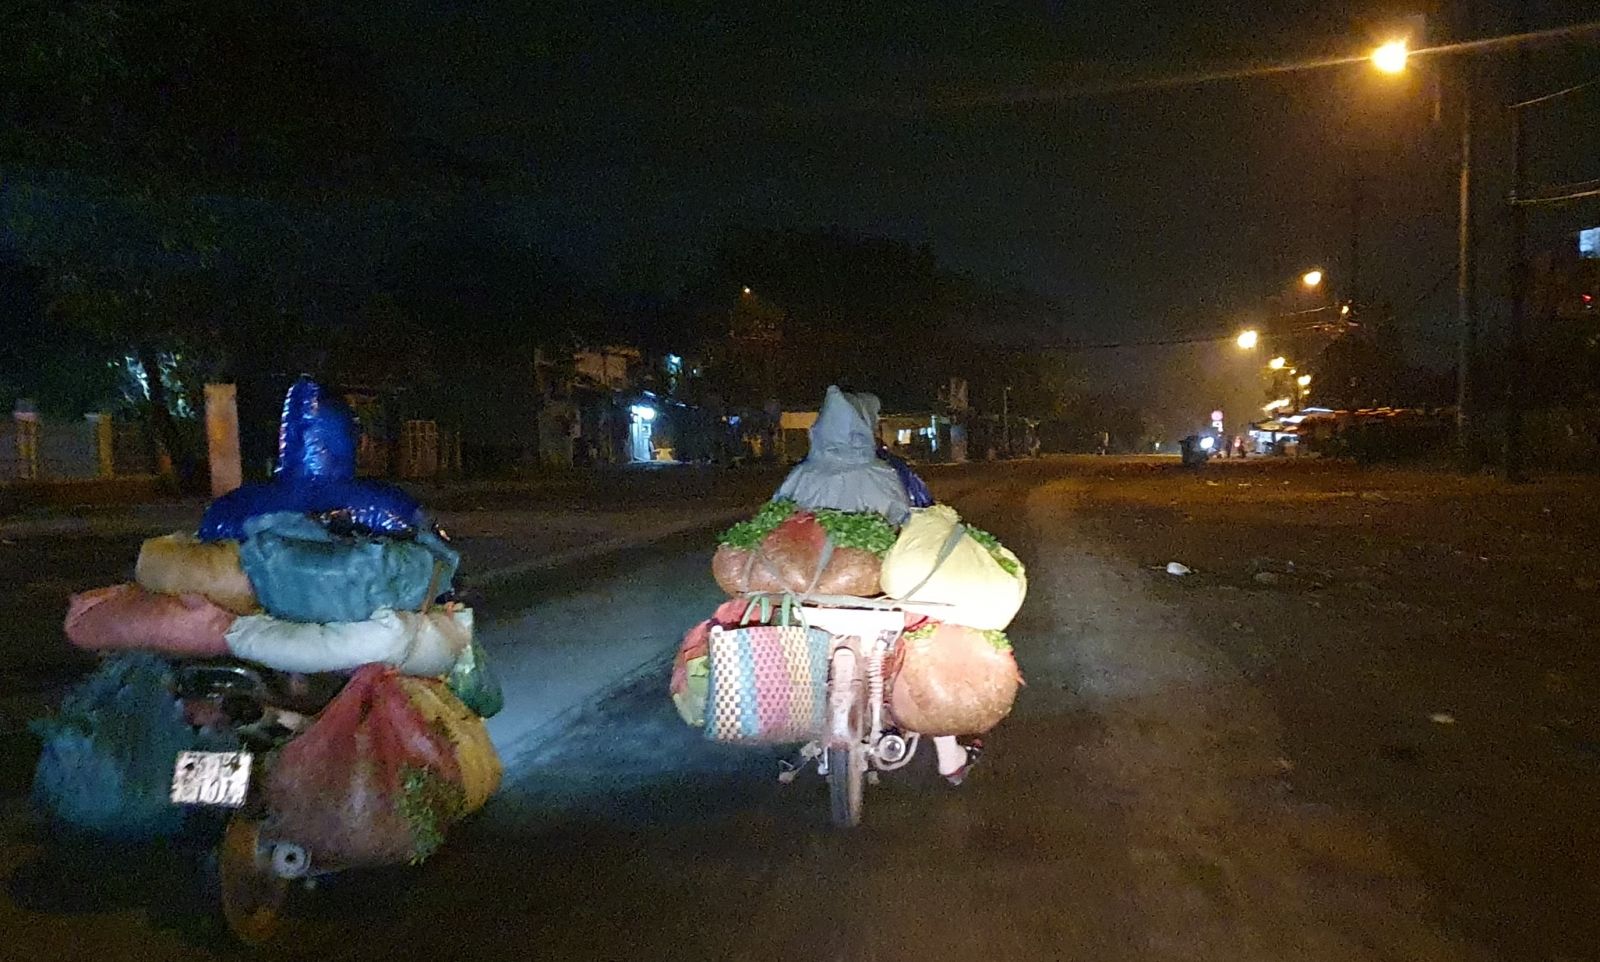 Around 2:30 a.m., the vegetables are transported to Phu Hau wholesale market